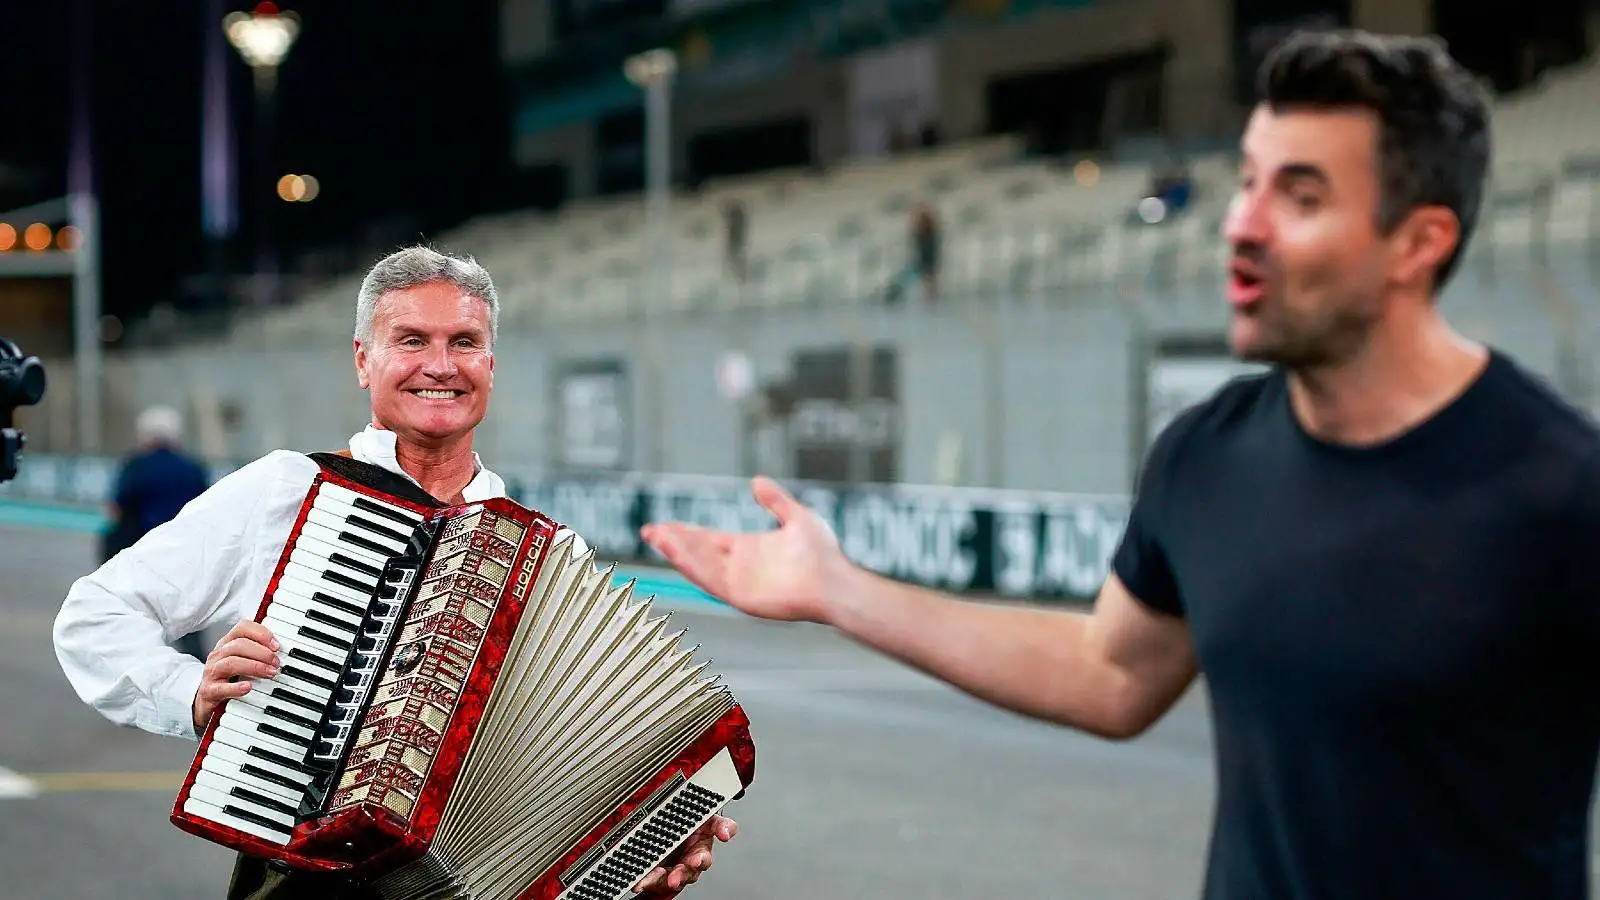 David Coulthard playing the accordian in Channel 4's end of F1 2023 song.